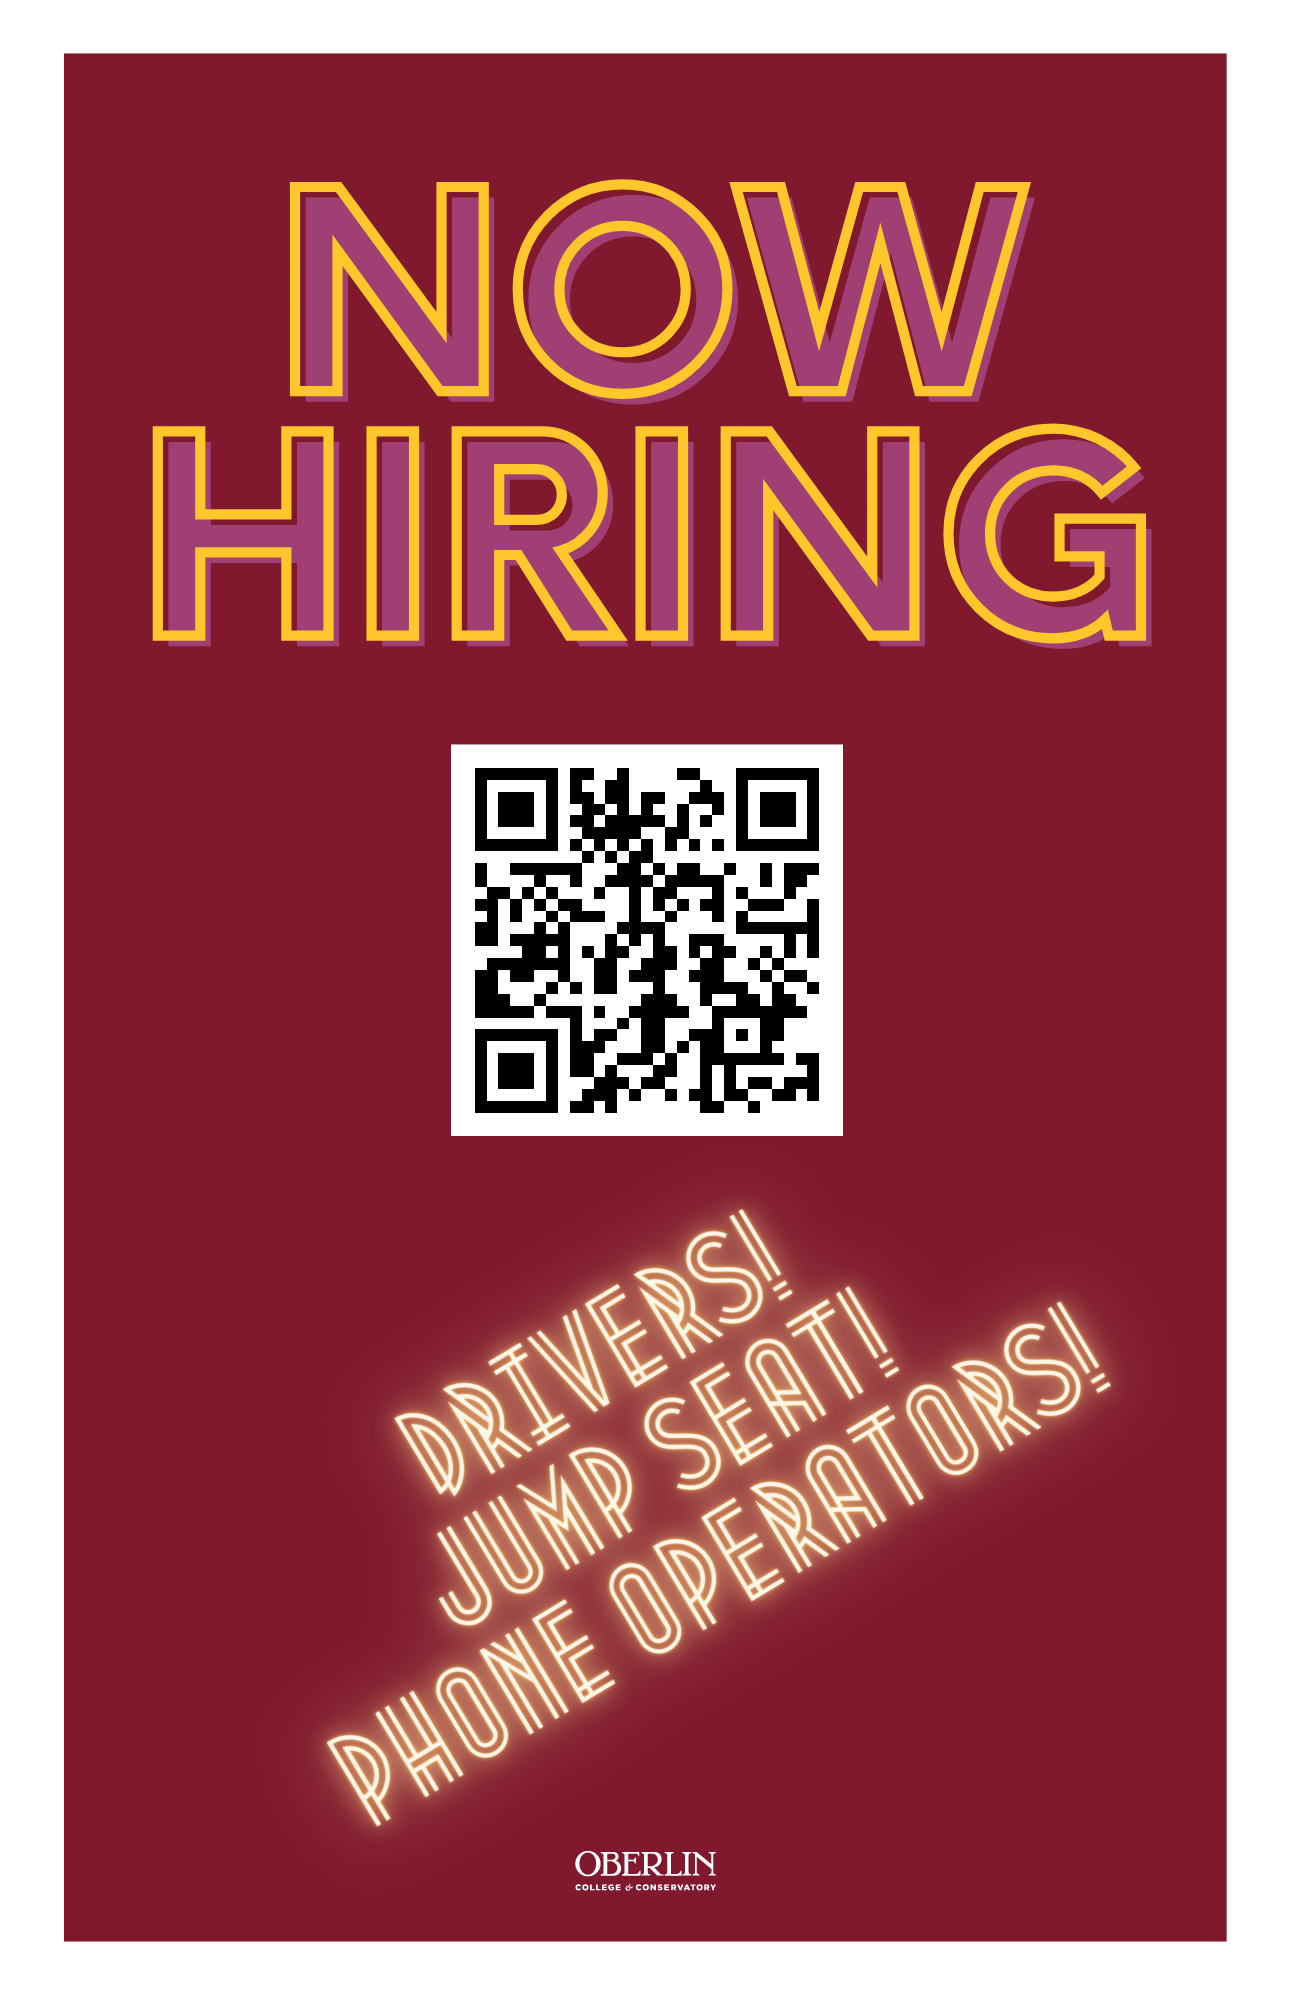 Student Shuttle is now hiring drivers, jump seat, and phone operators.